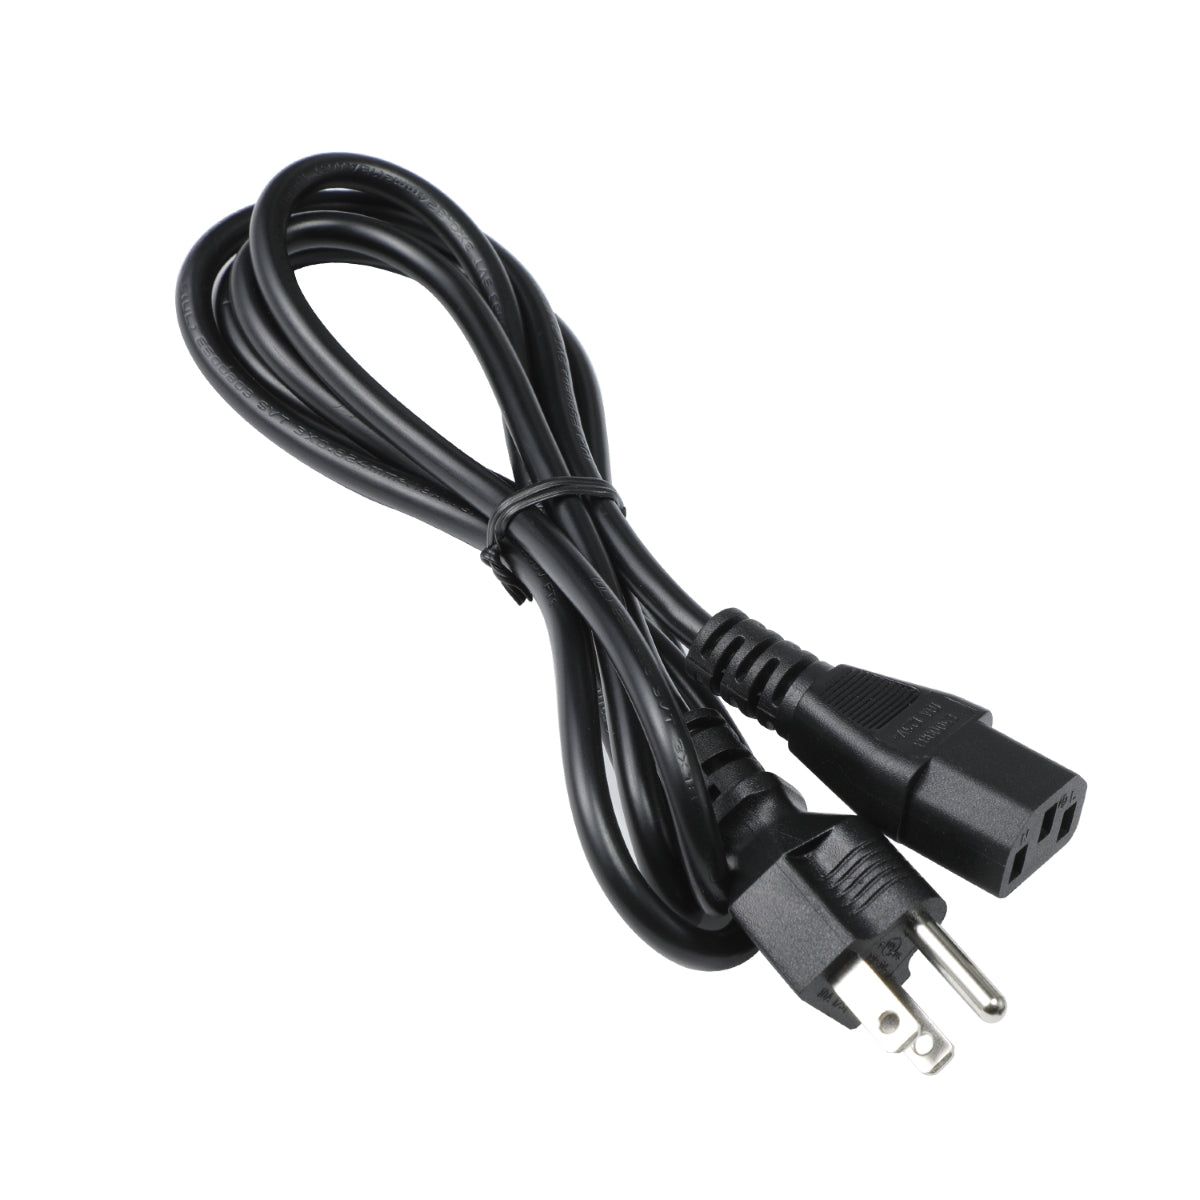 Power Cord for Samsung LS27A600UUNXGO Monitor TV.